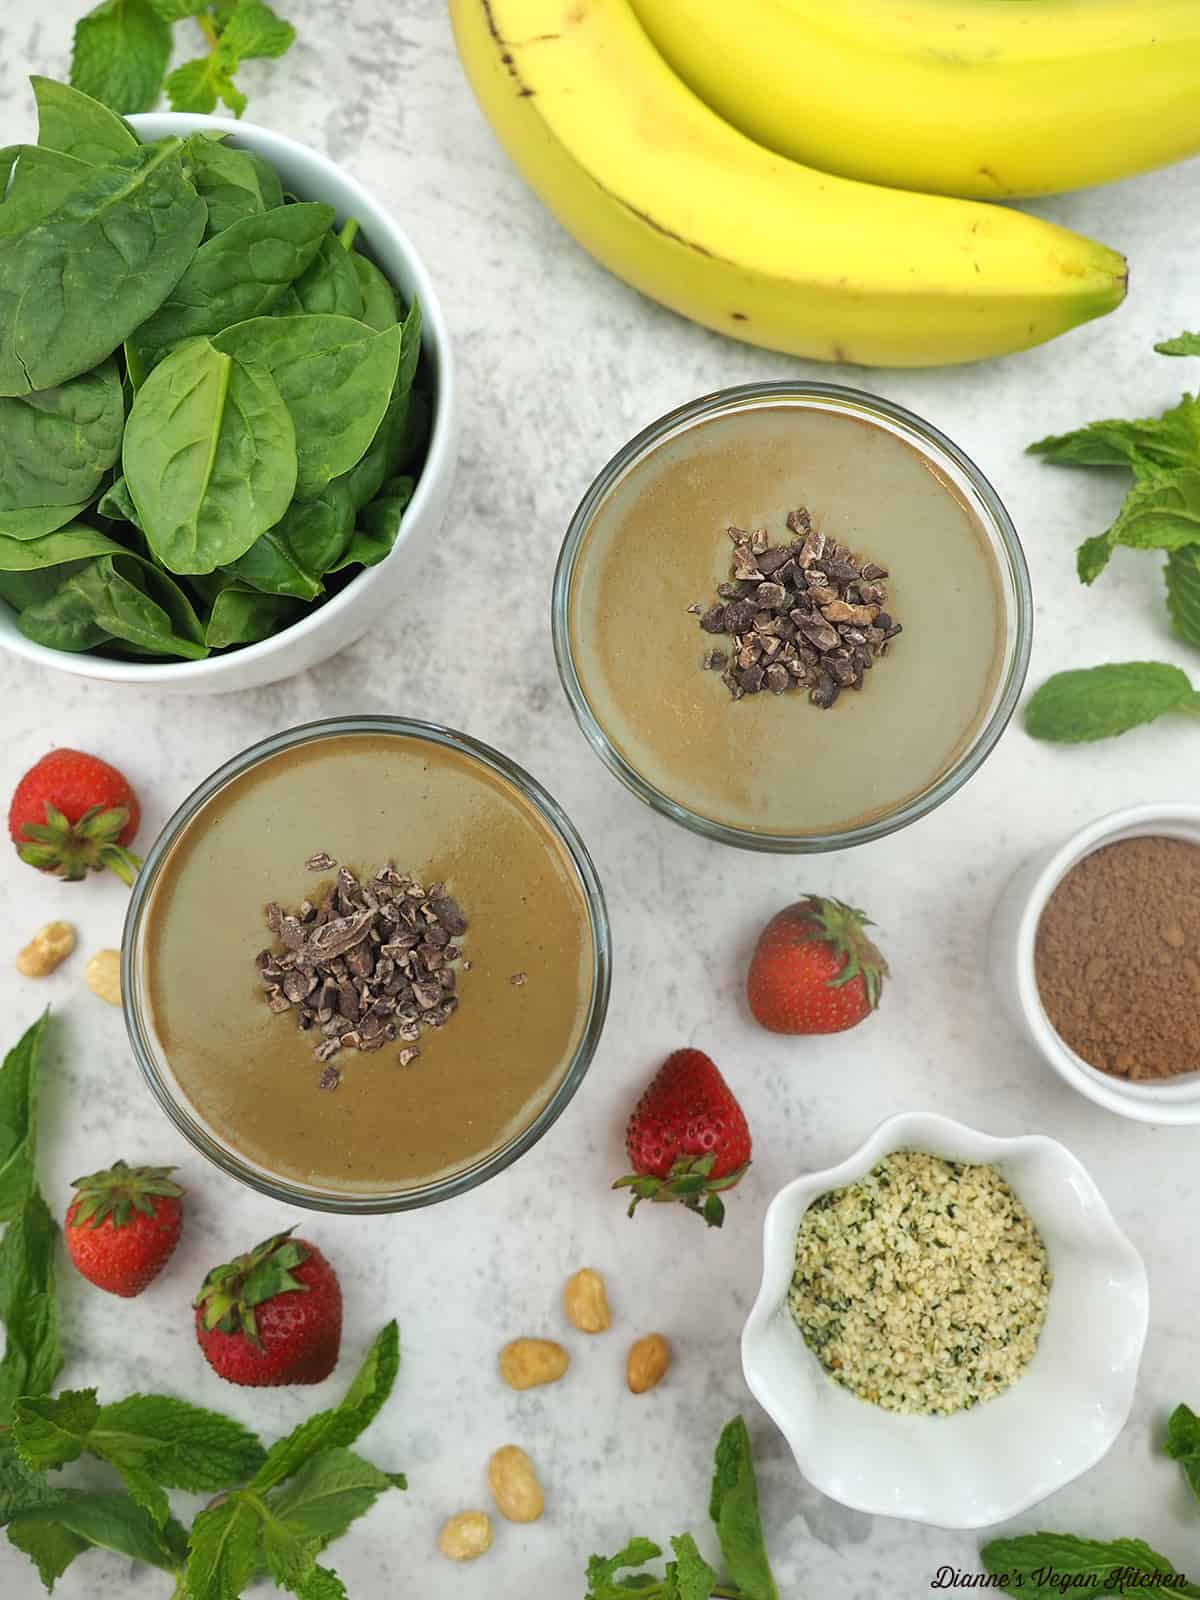 Top two smoothie glasses with banana, spinach and strawberries